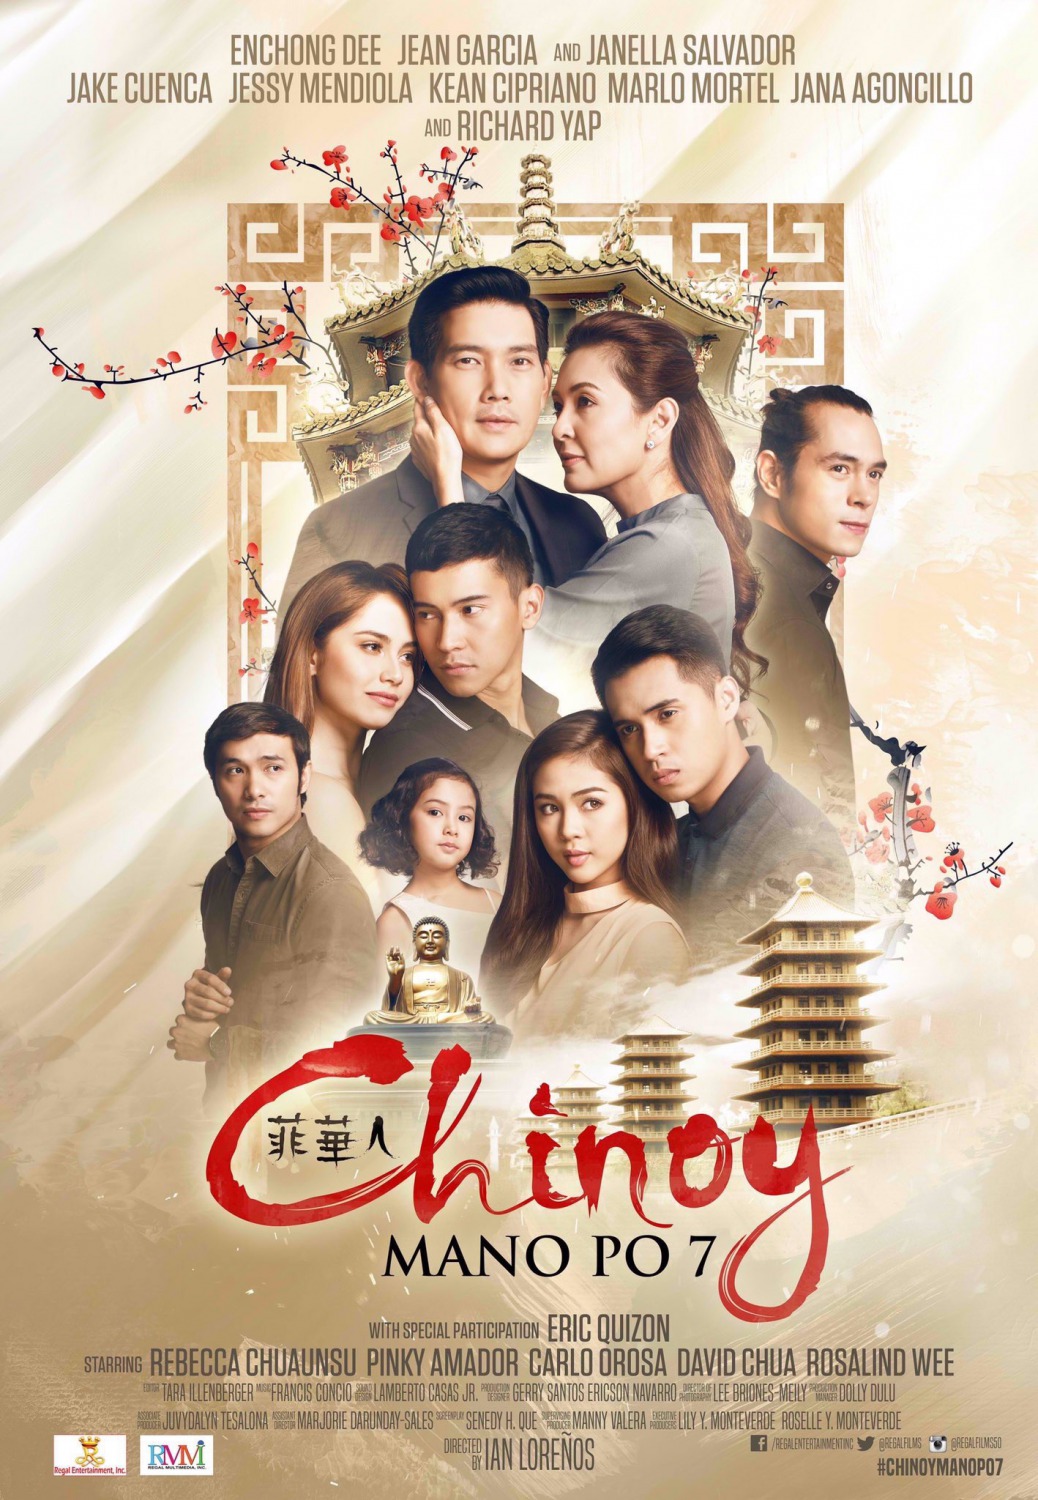 Extra Large Movie Poster Image for Mano po 7: Chinoy (#1 of 2)